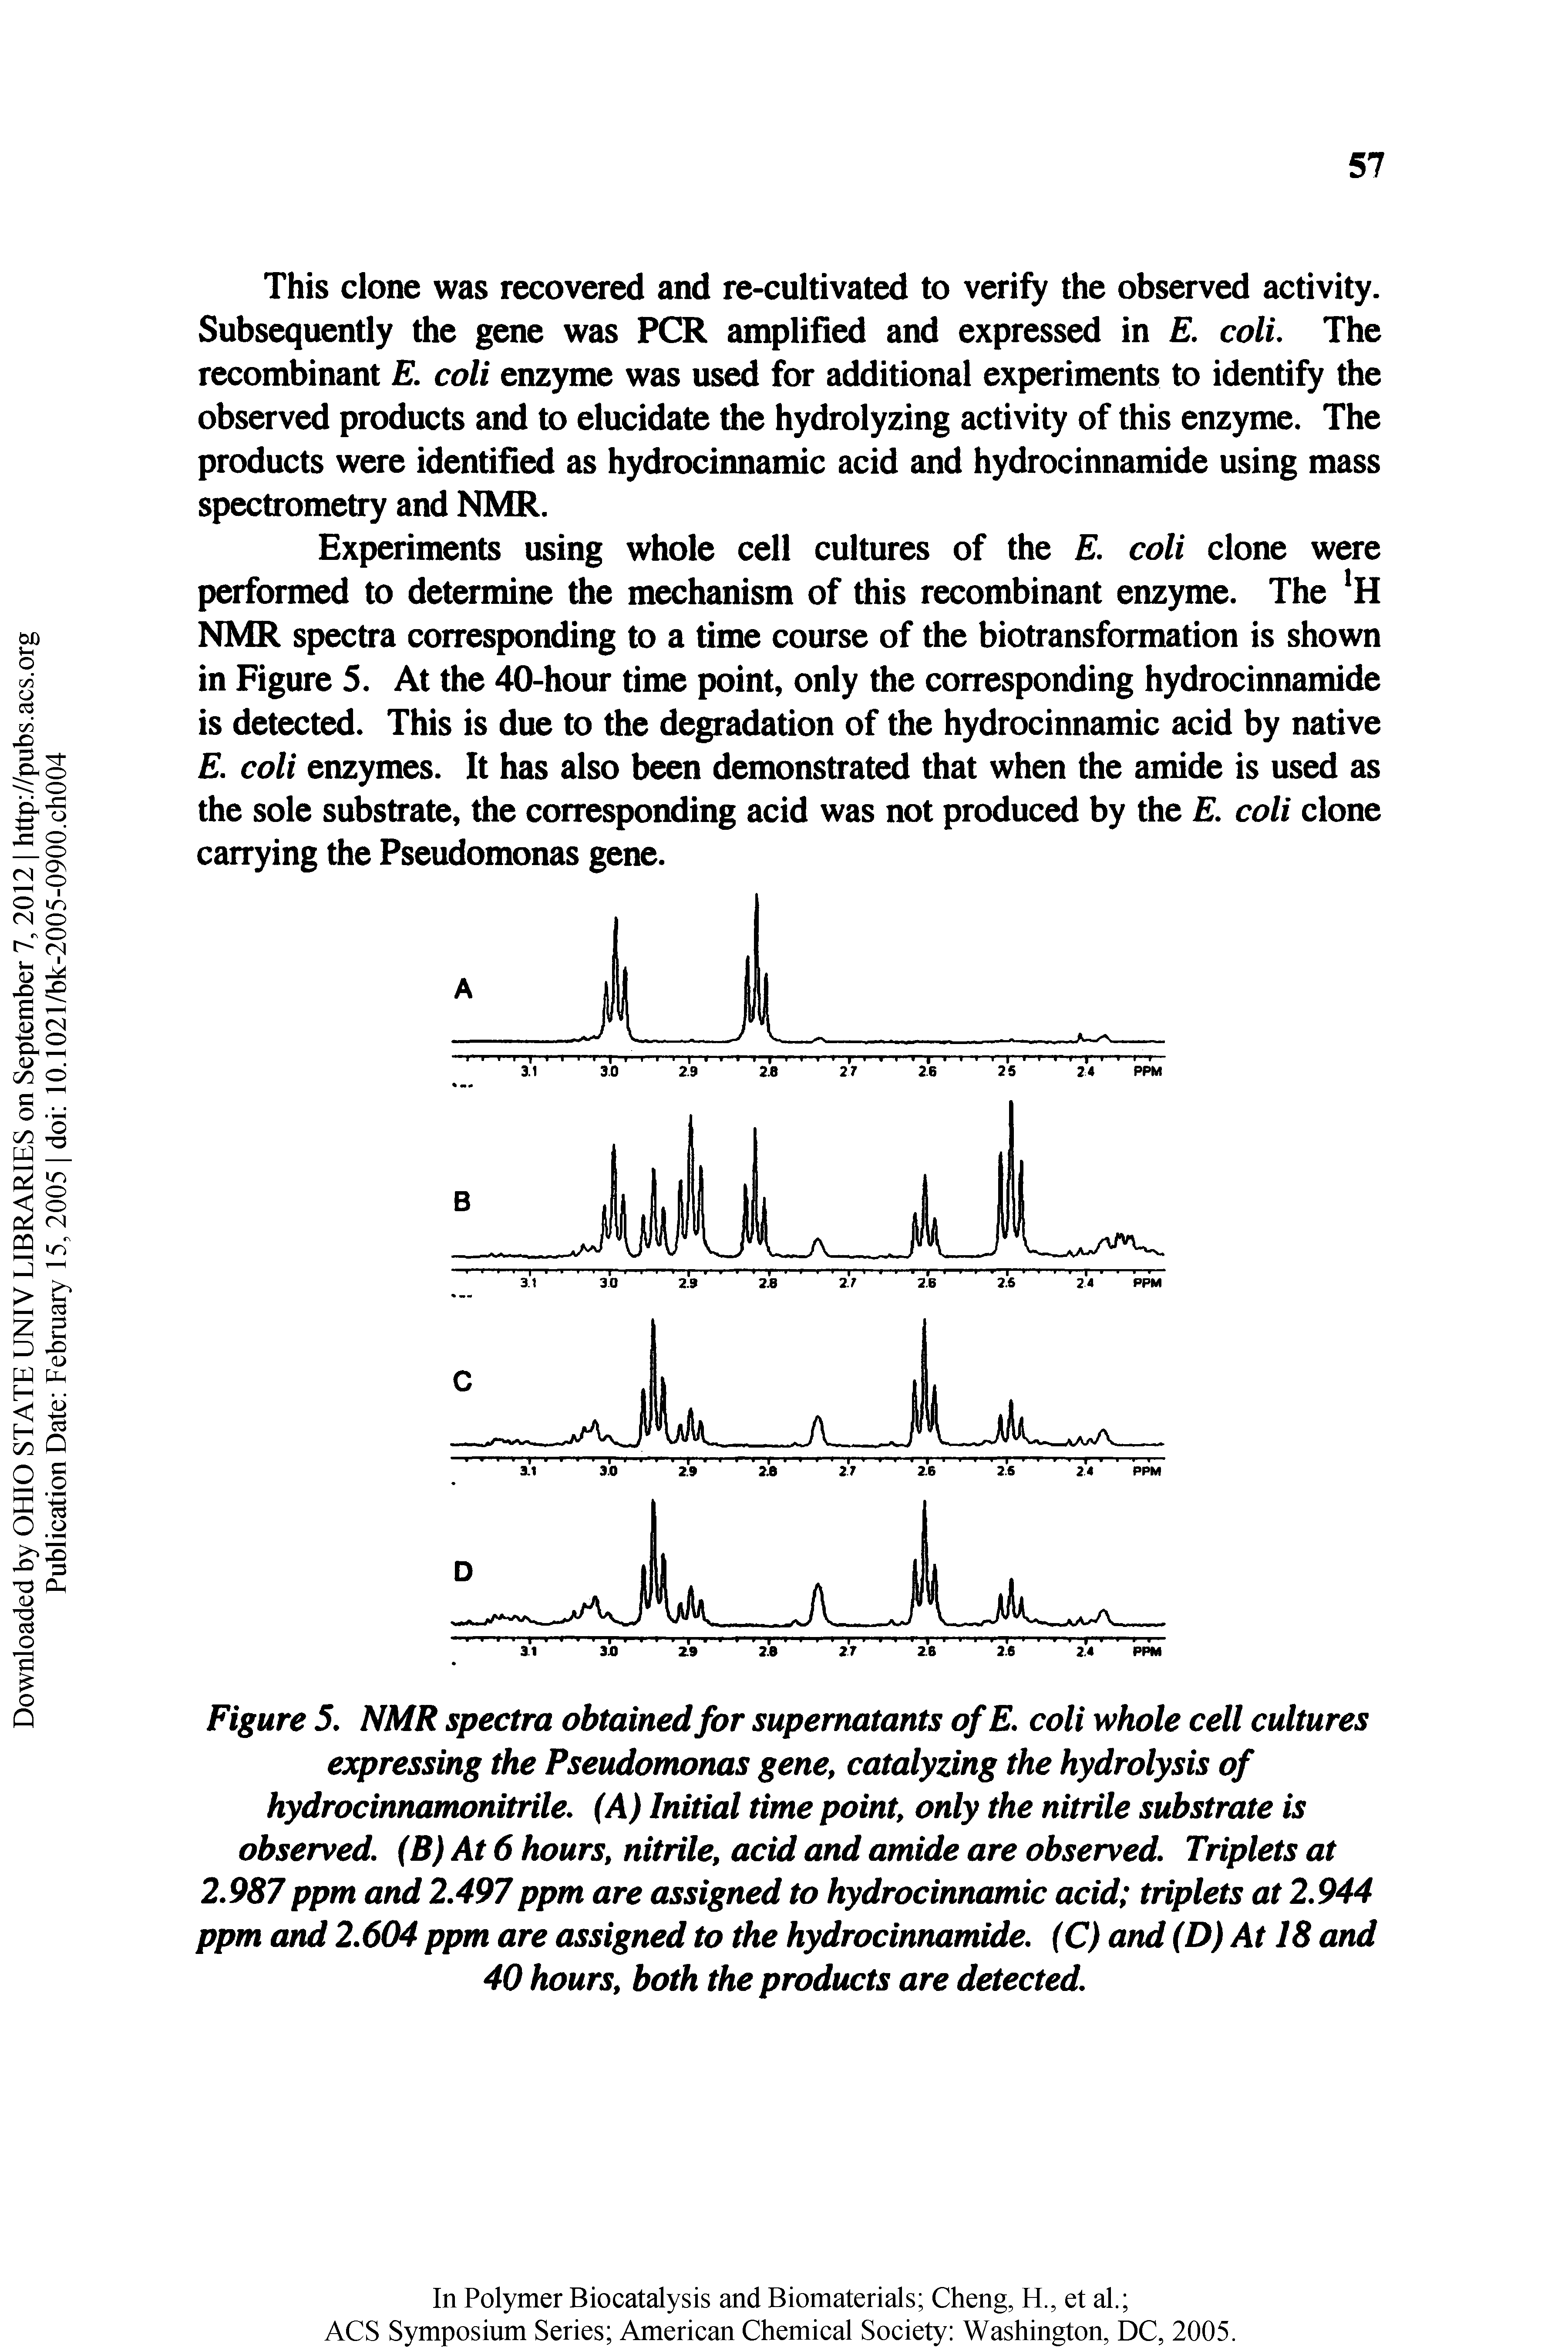 Figure 5. NMR spectra obtained for supernatants ofE. coli whole cell cultures expressing the Pseudomonas gene, catalyzing the hydrolysis of hydrocinnamonitrile. (A) Initial time point, only the nitrile substrate is observed, (B) At 6 hours, nitrile, acid and amide are observed. Triplets at 2.987ppm and 2.497ppm are assigned to hydrocinnamic acid triplets at 2,944 ppm and 2.604 ppm are assigned to the hydrocinnamide. (C) and (D) At 18 and 40 hours, both the products are detected.